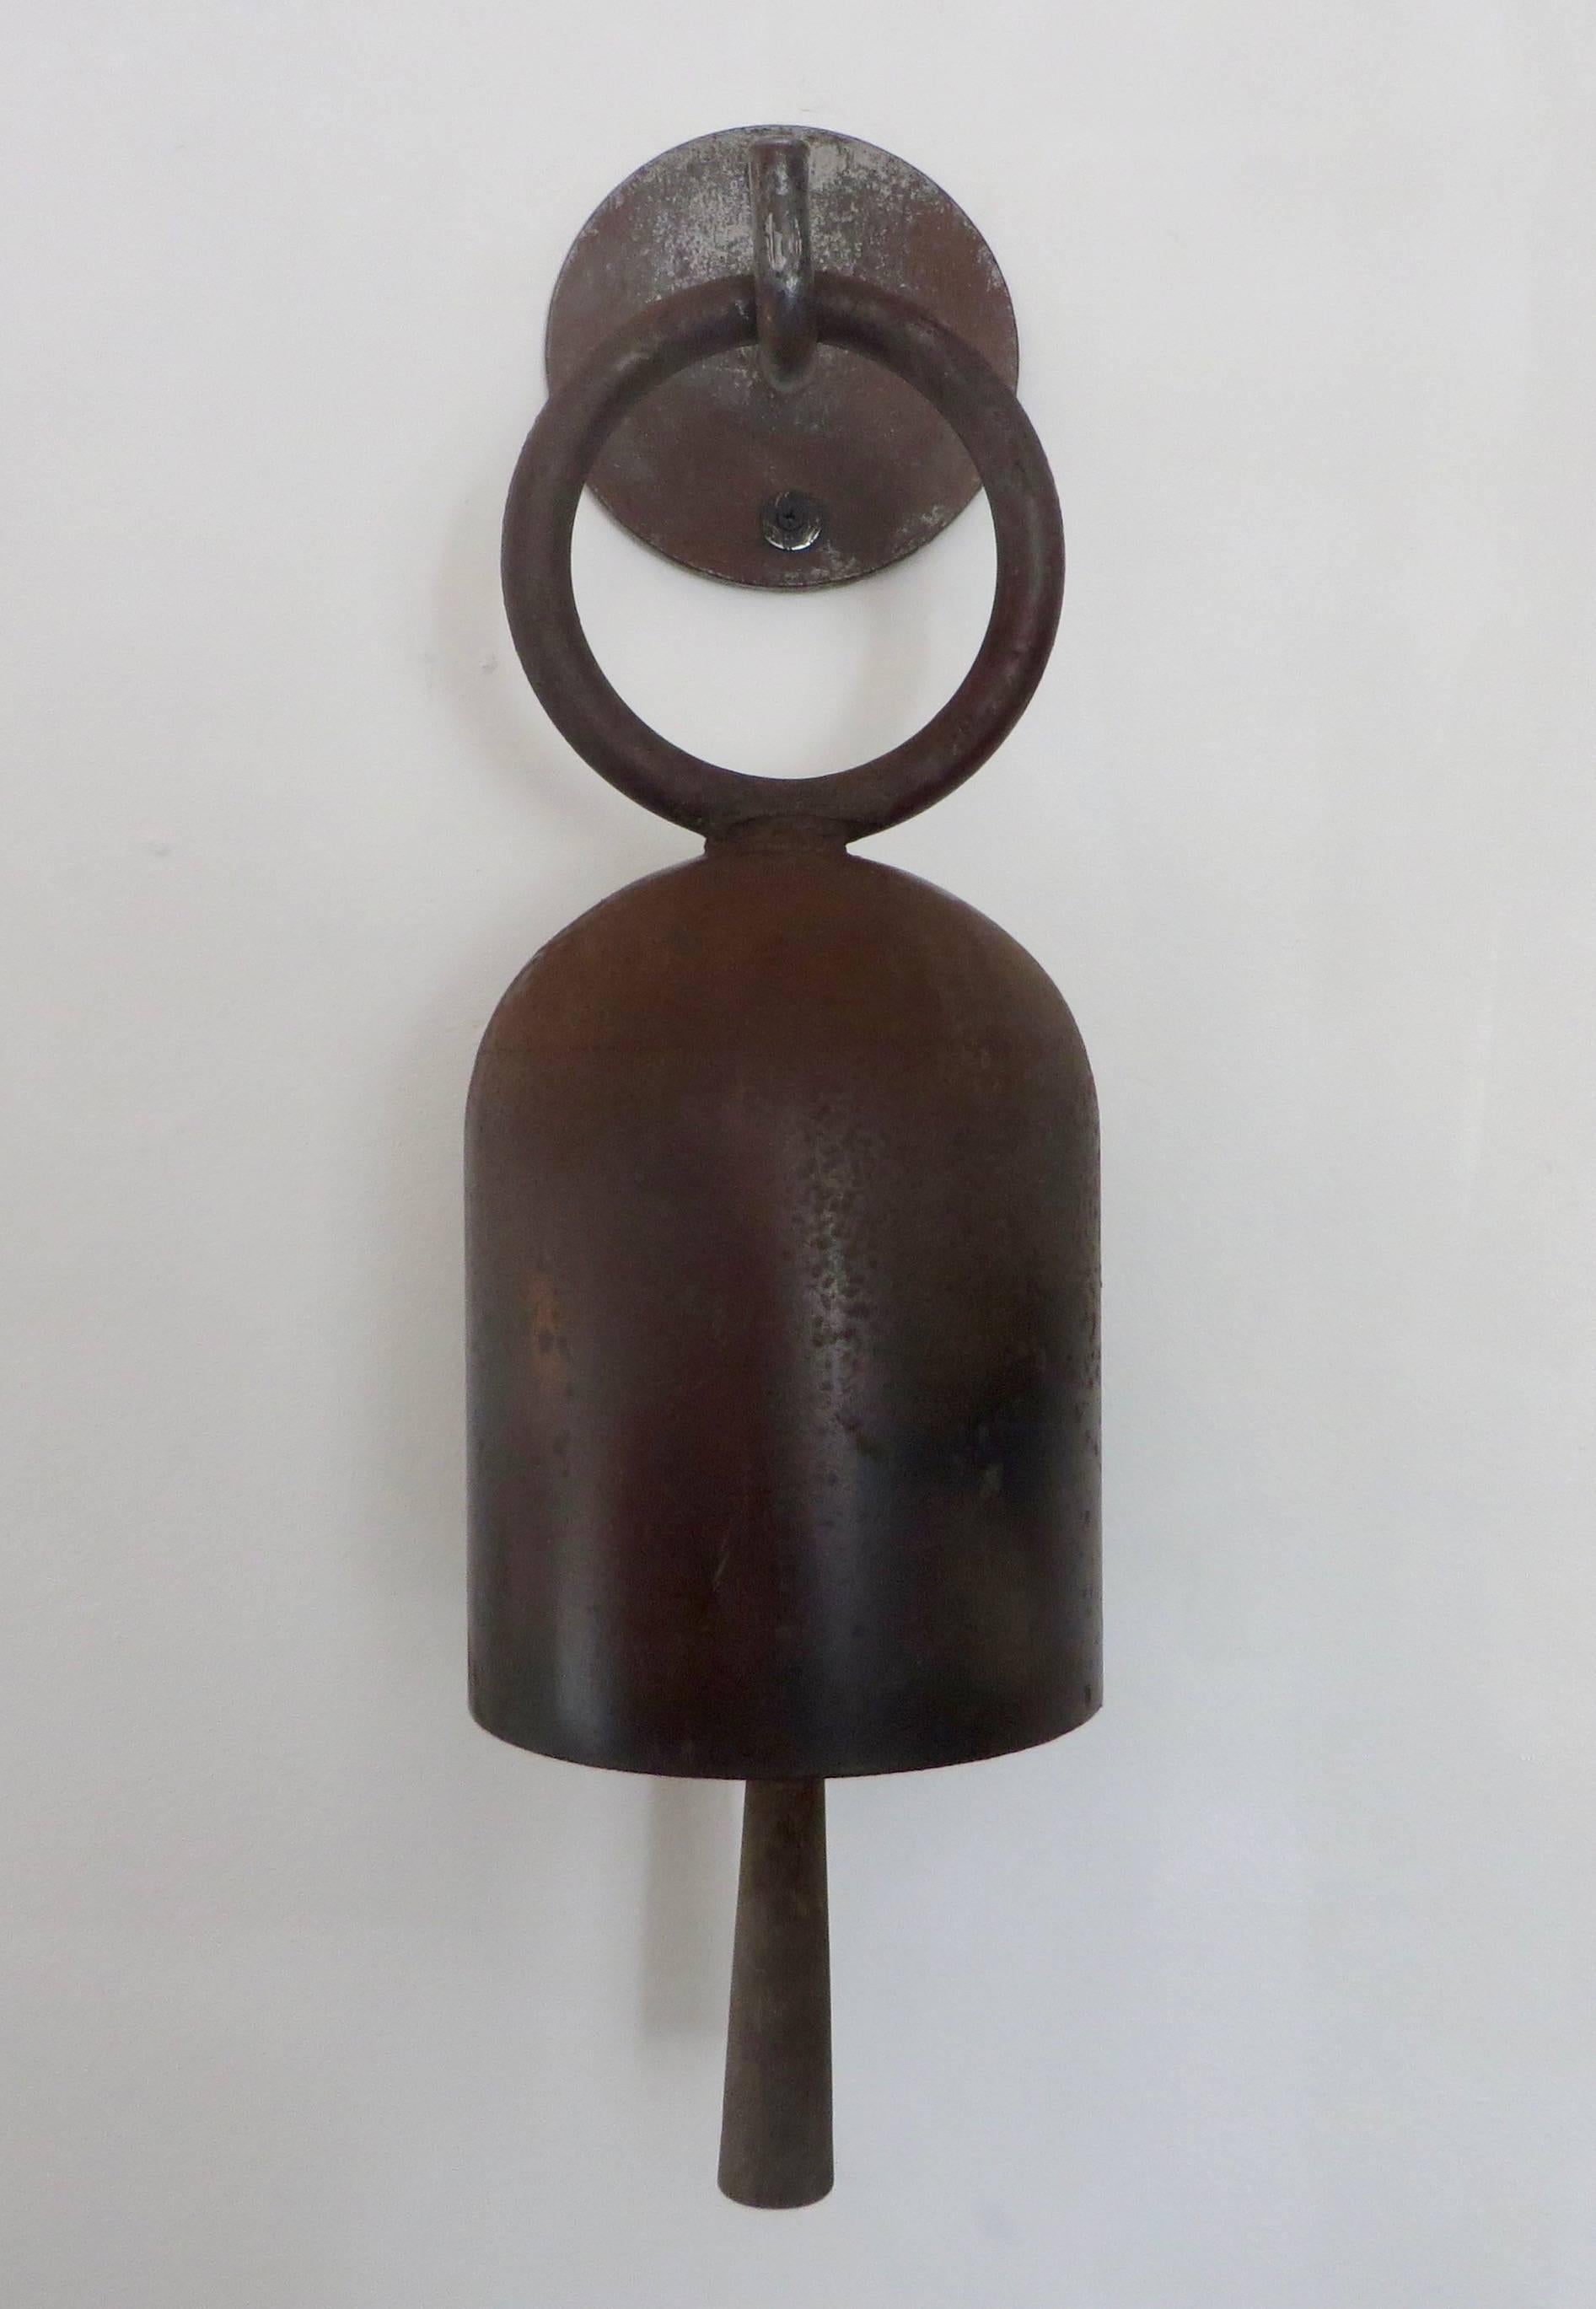 Pacific Northcoast artist Tom Torrens vintage Minimalist bronze door gong or door bell. 
The welded steel bell has a beautiful warm patina and the bell knocker is hand-carved wood with suede wrapper to create a soft gong. 
Each piece created by